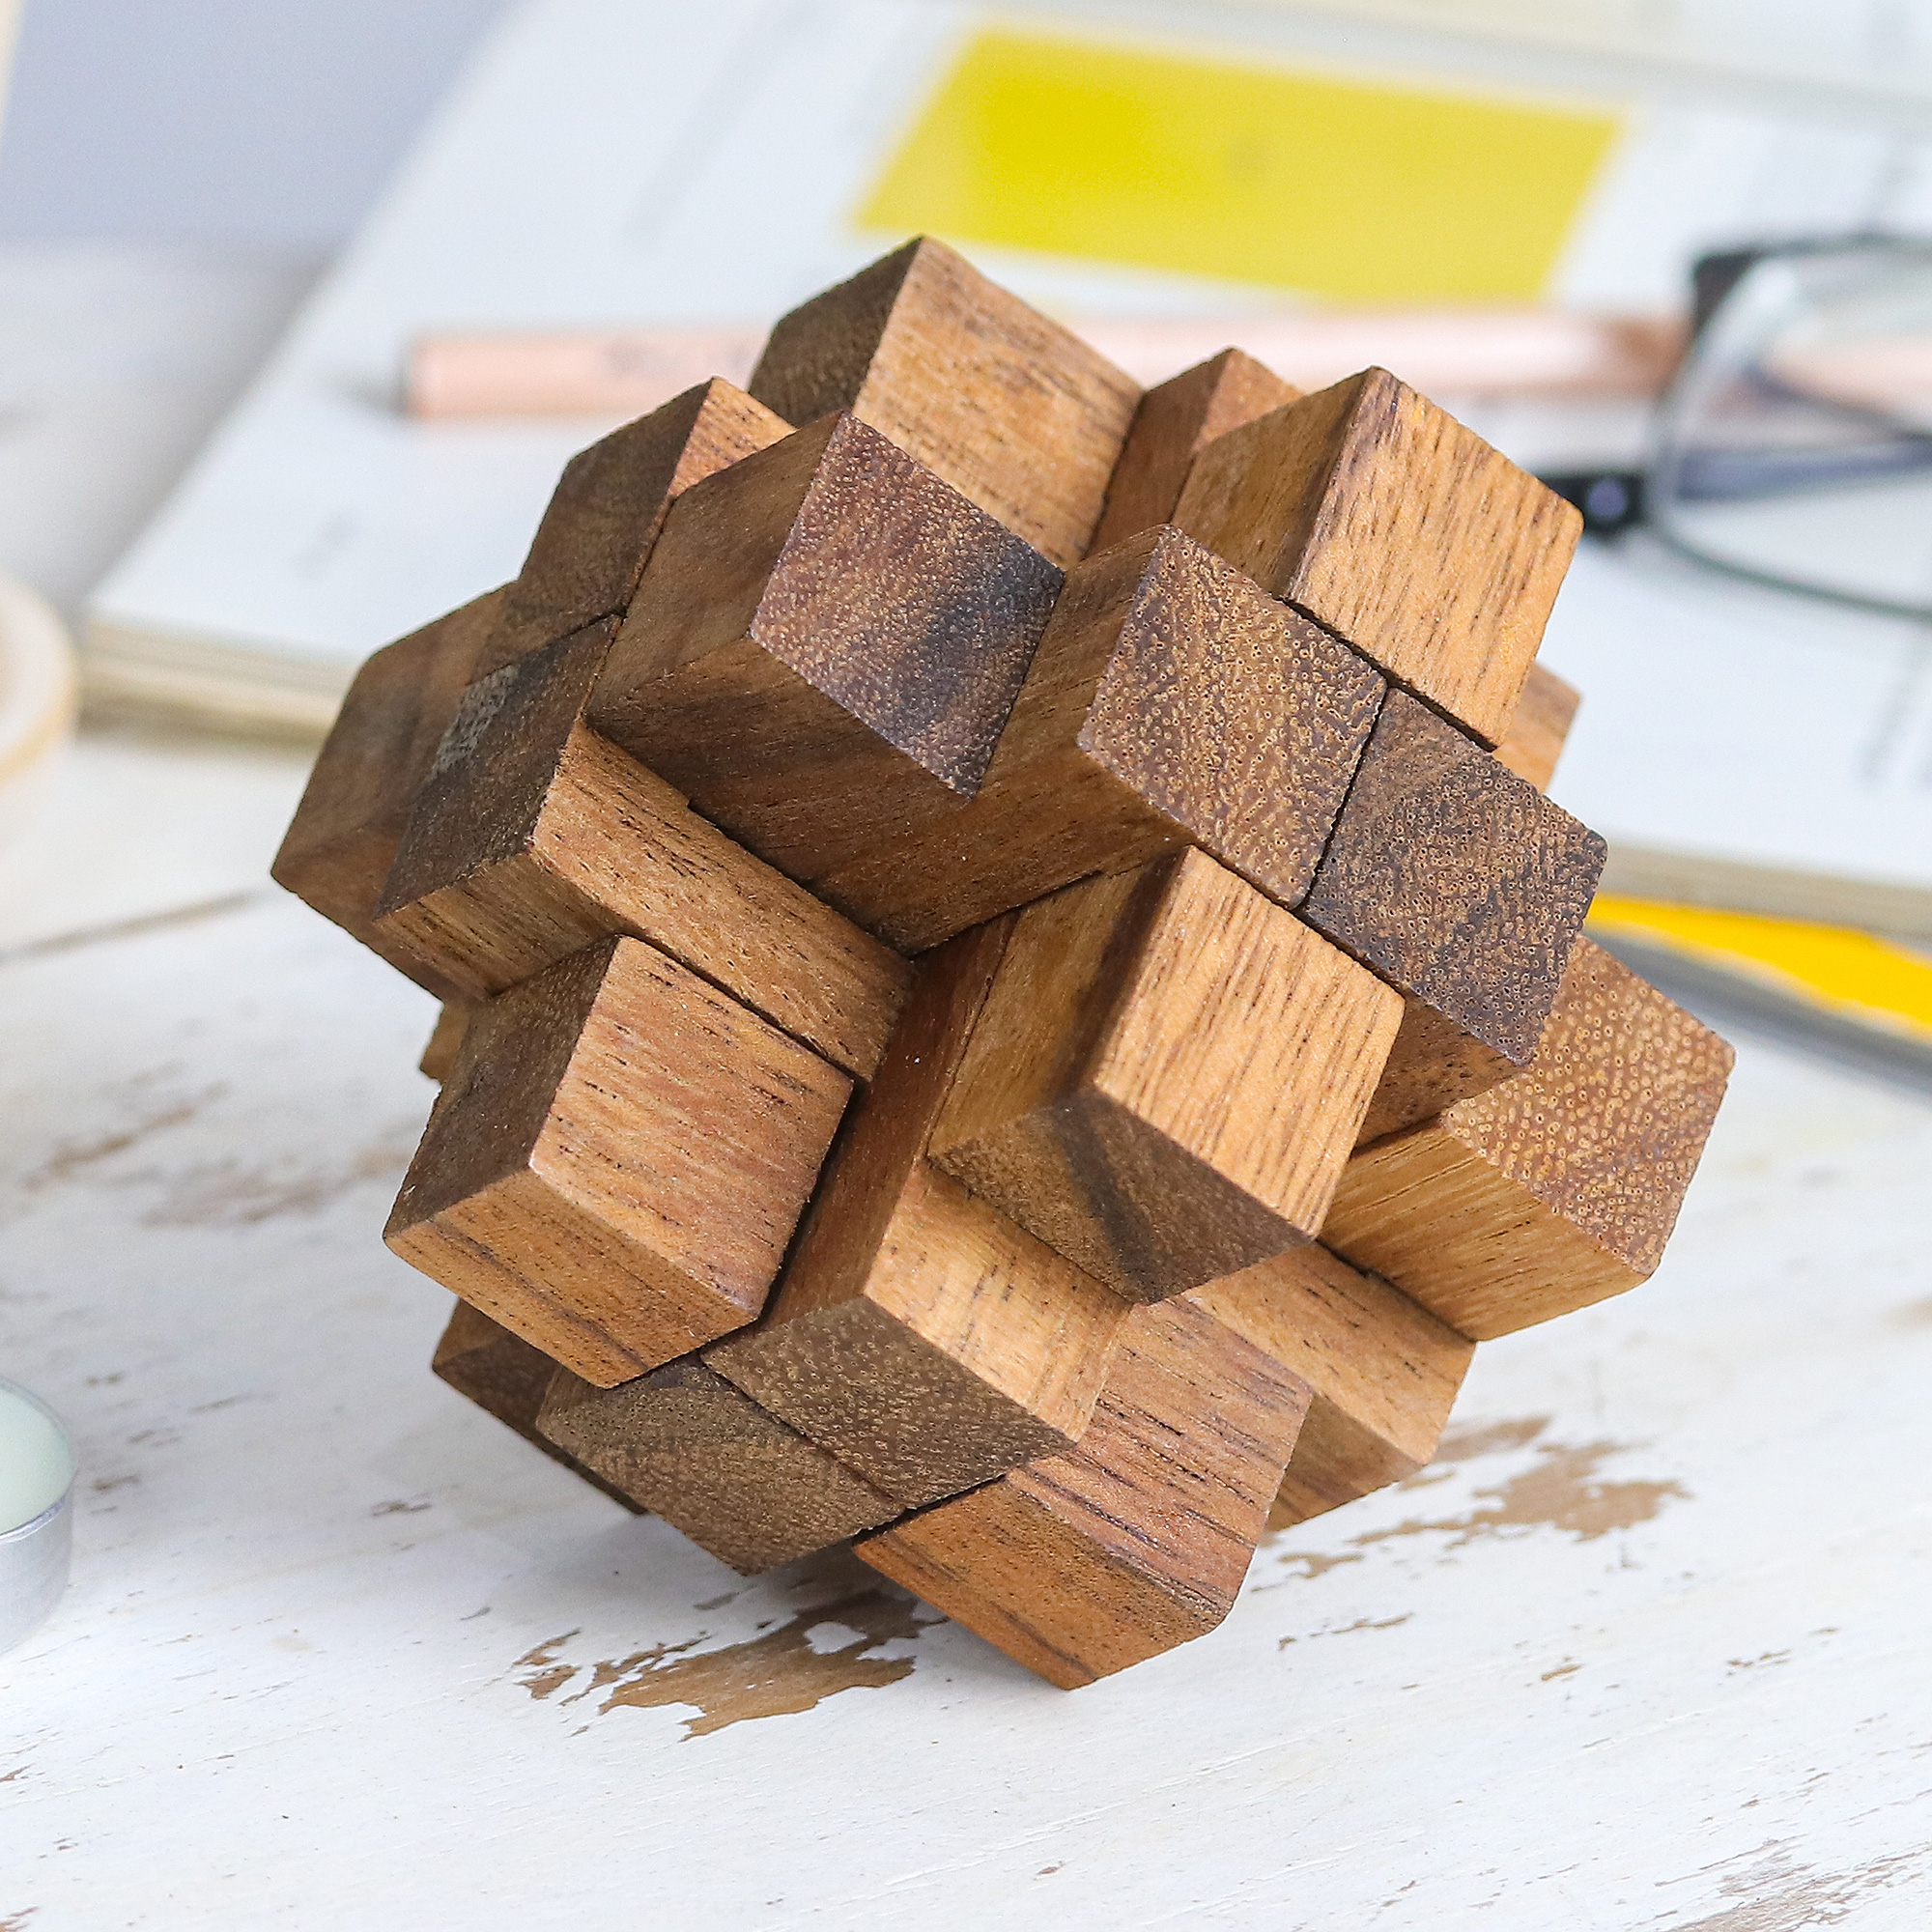 Hand Made Wood Puzzle Game Geometric from Thailand - Diamond Cube | NOVICA